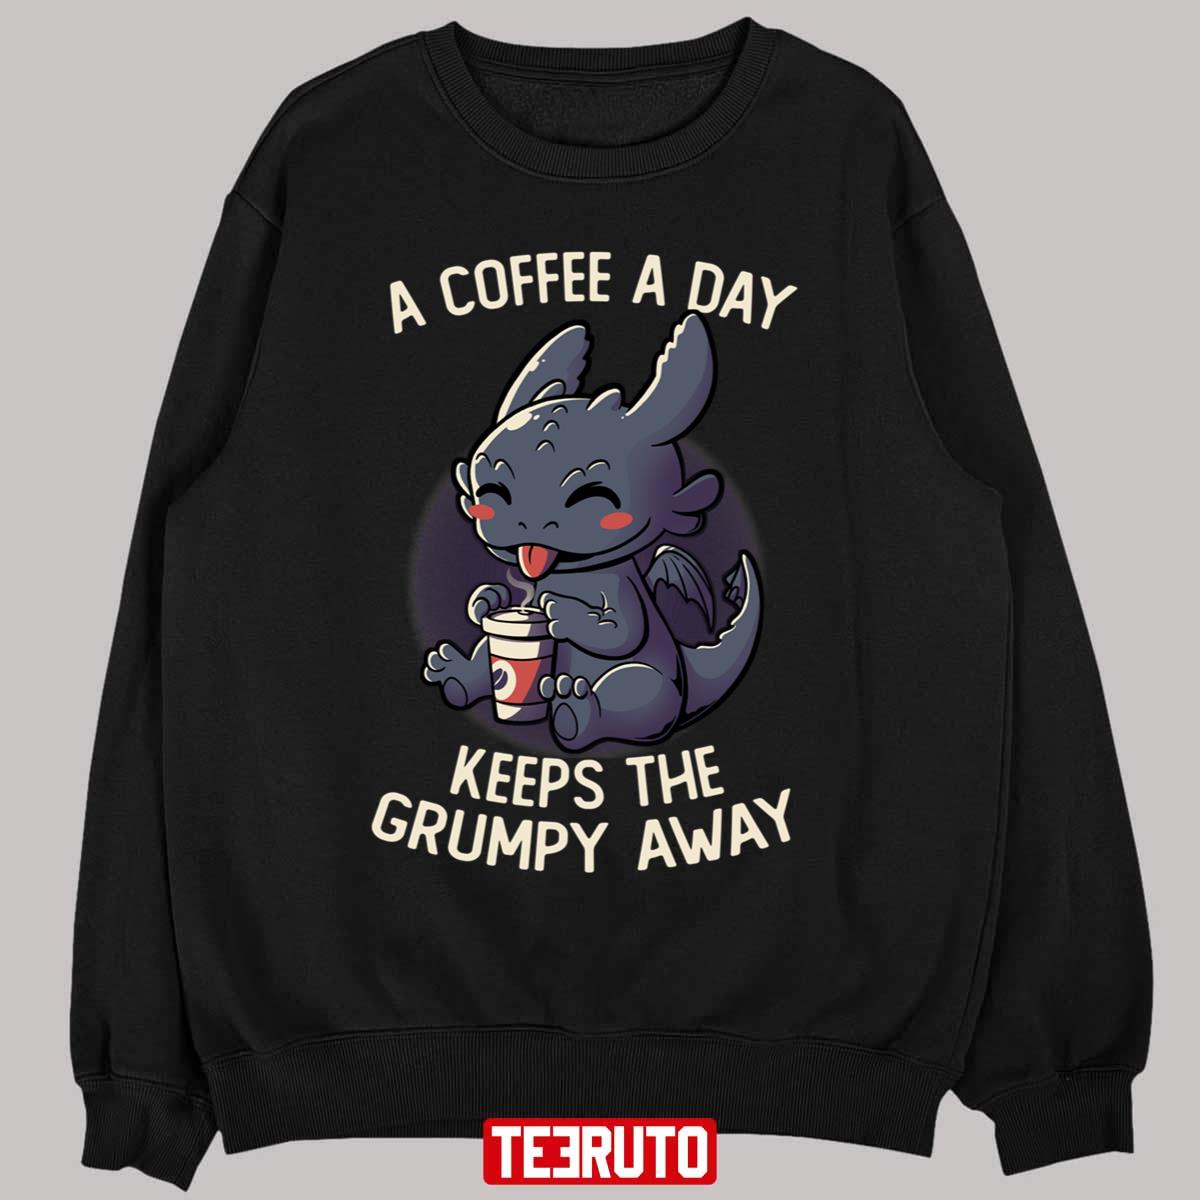 A Coffee A Day Keeps The Grumpy Away Funny Toothless Design Unisex Sweatshirt